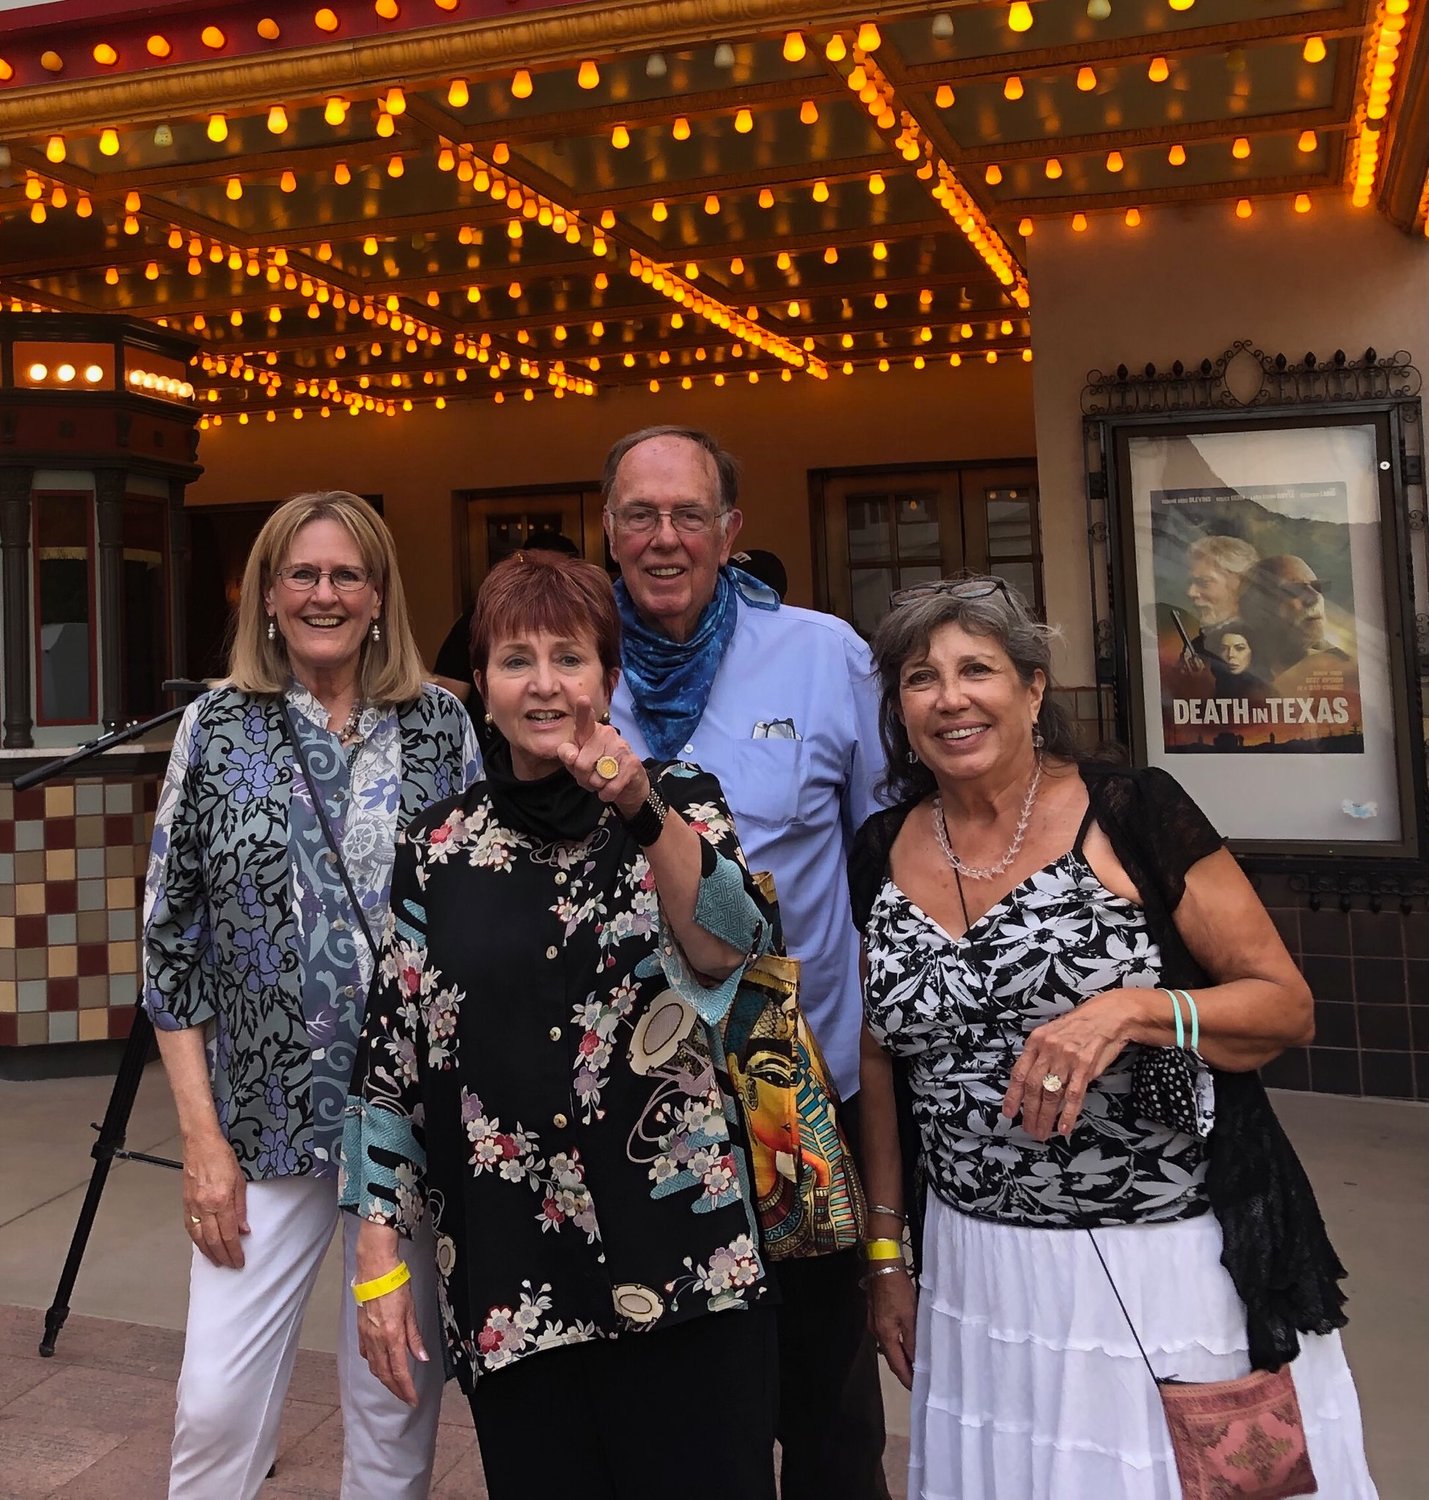 Left to right are Kathleen Albers, Kathleen Key, Bill Key and Gloria Contreras at an ARTE summer excursion in El Paso.